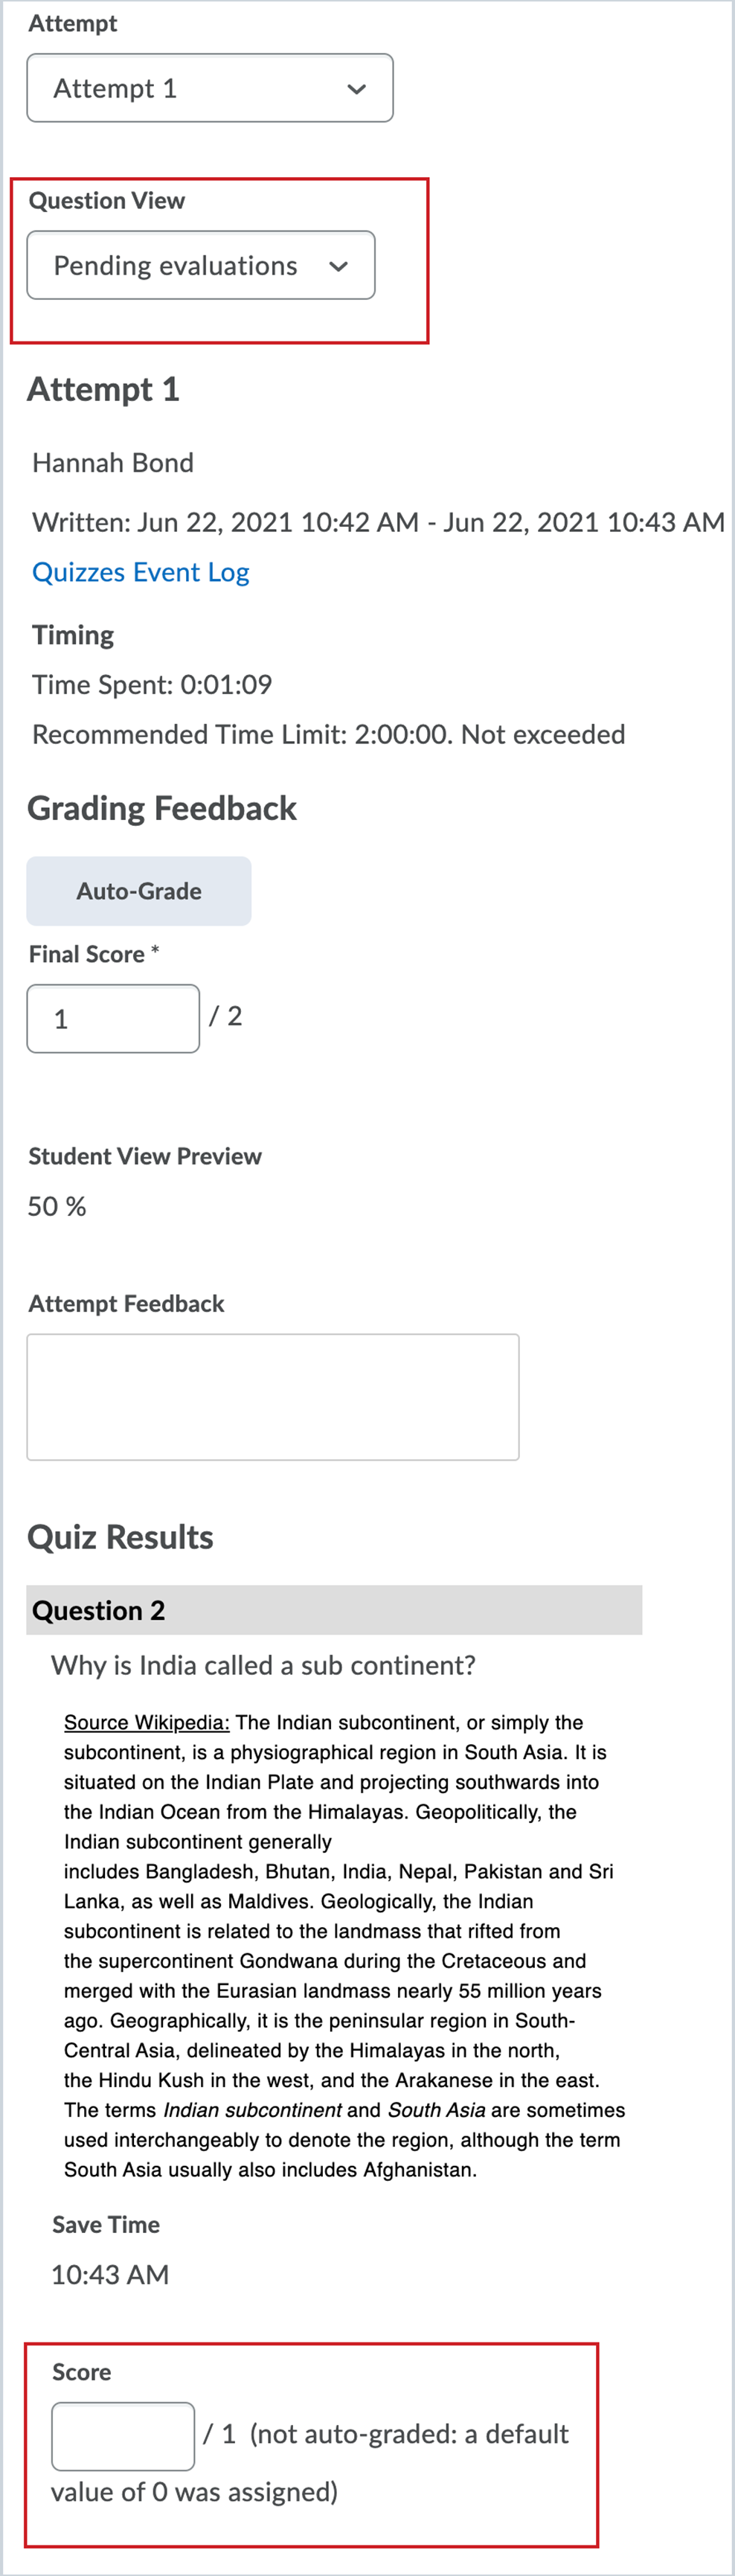 Figure: The new Pending Evaluation filter appears in the Question View drop-down menu to easily locate questions requiring manual evaluation by the instructor